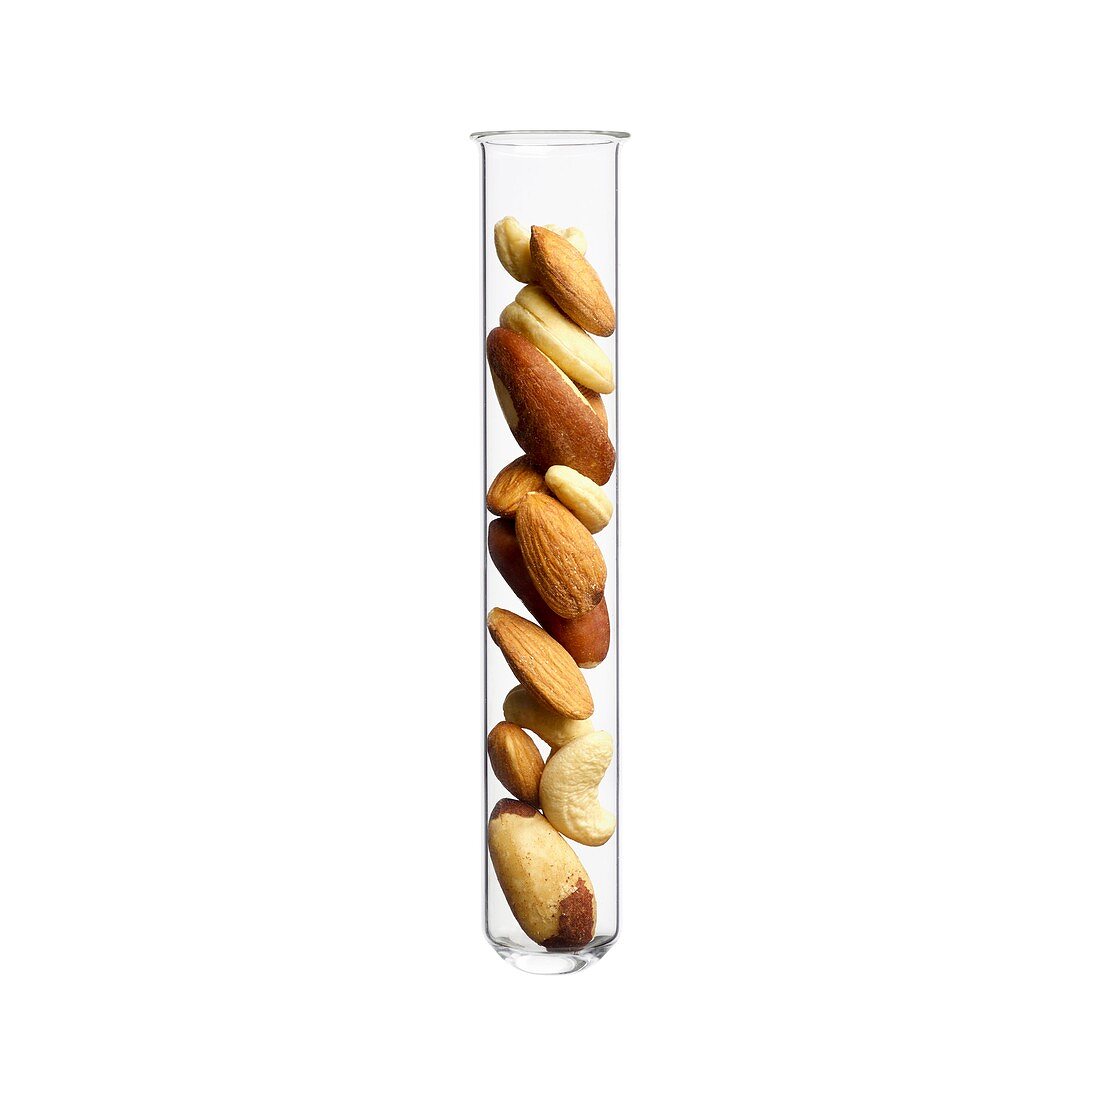 Mixed nuts in test tube